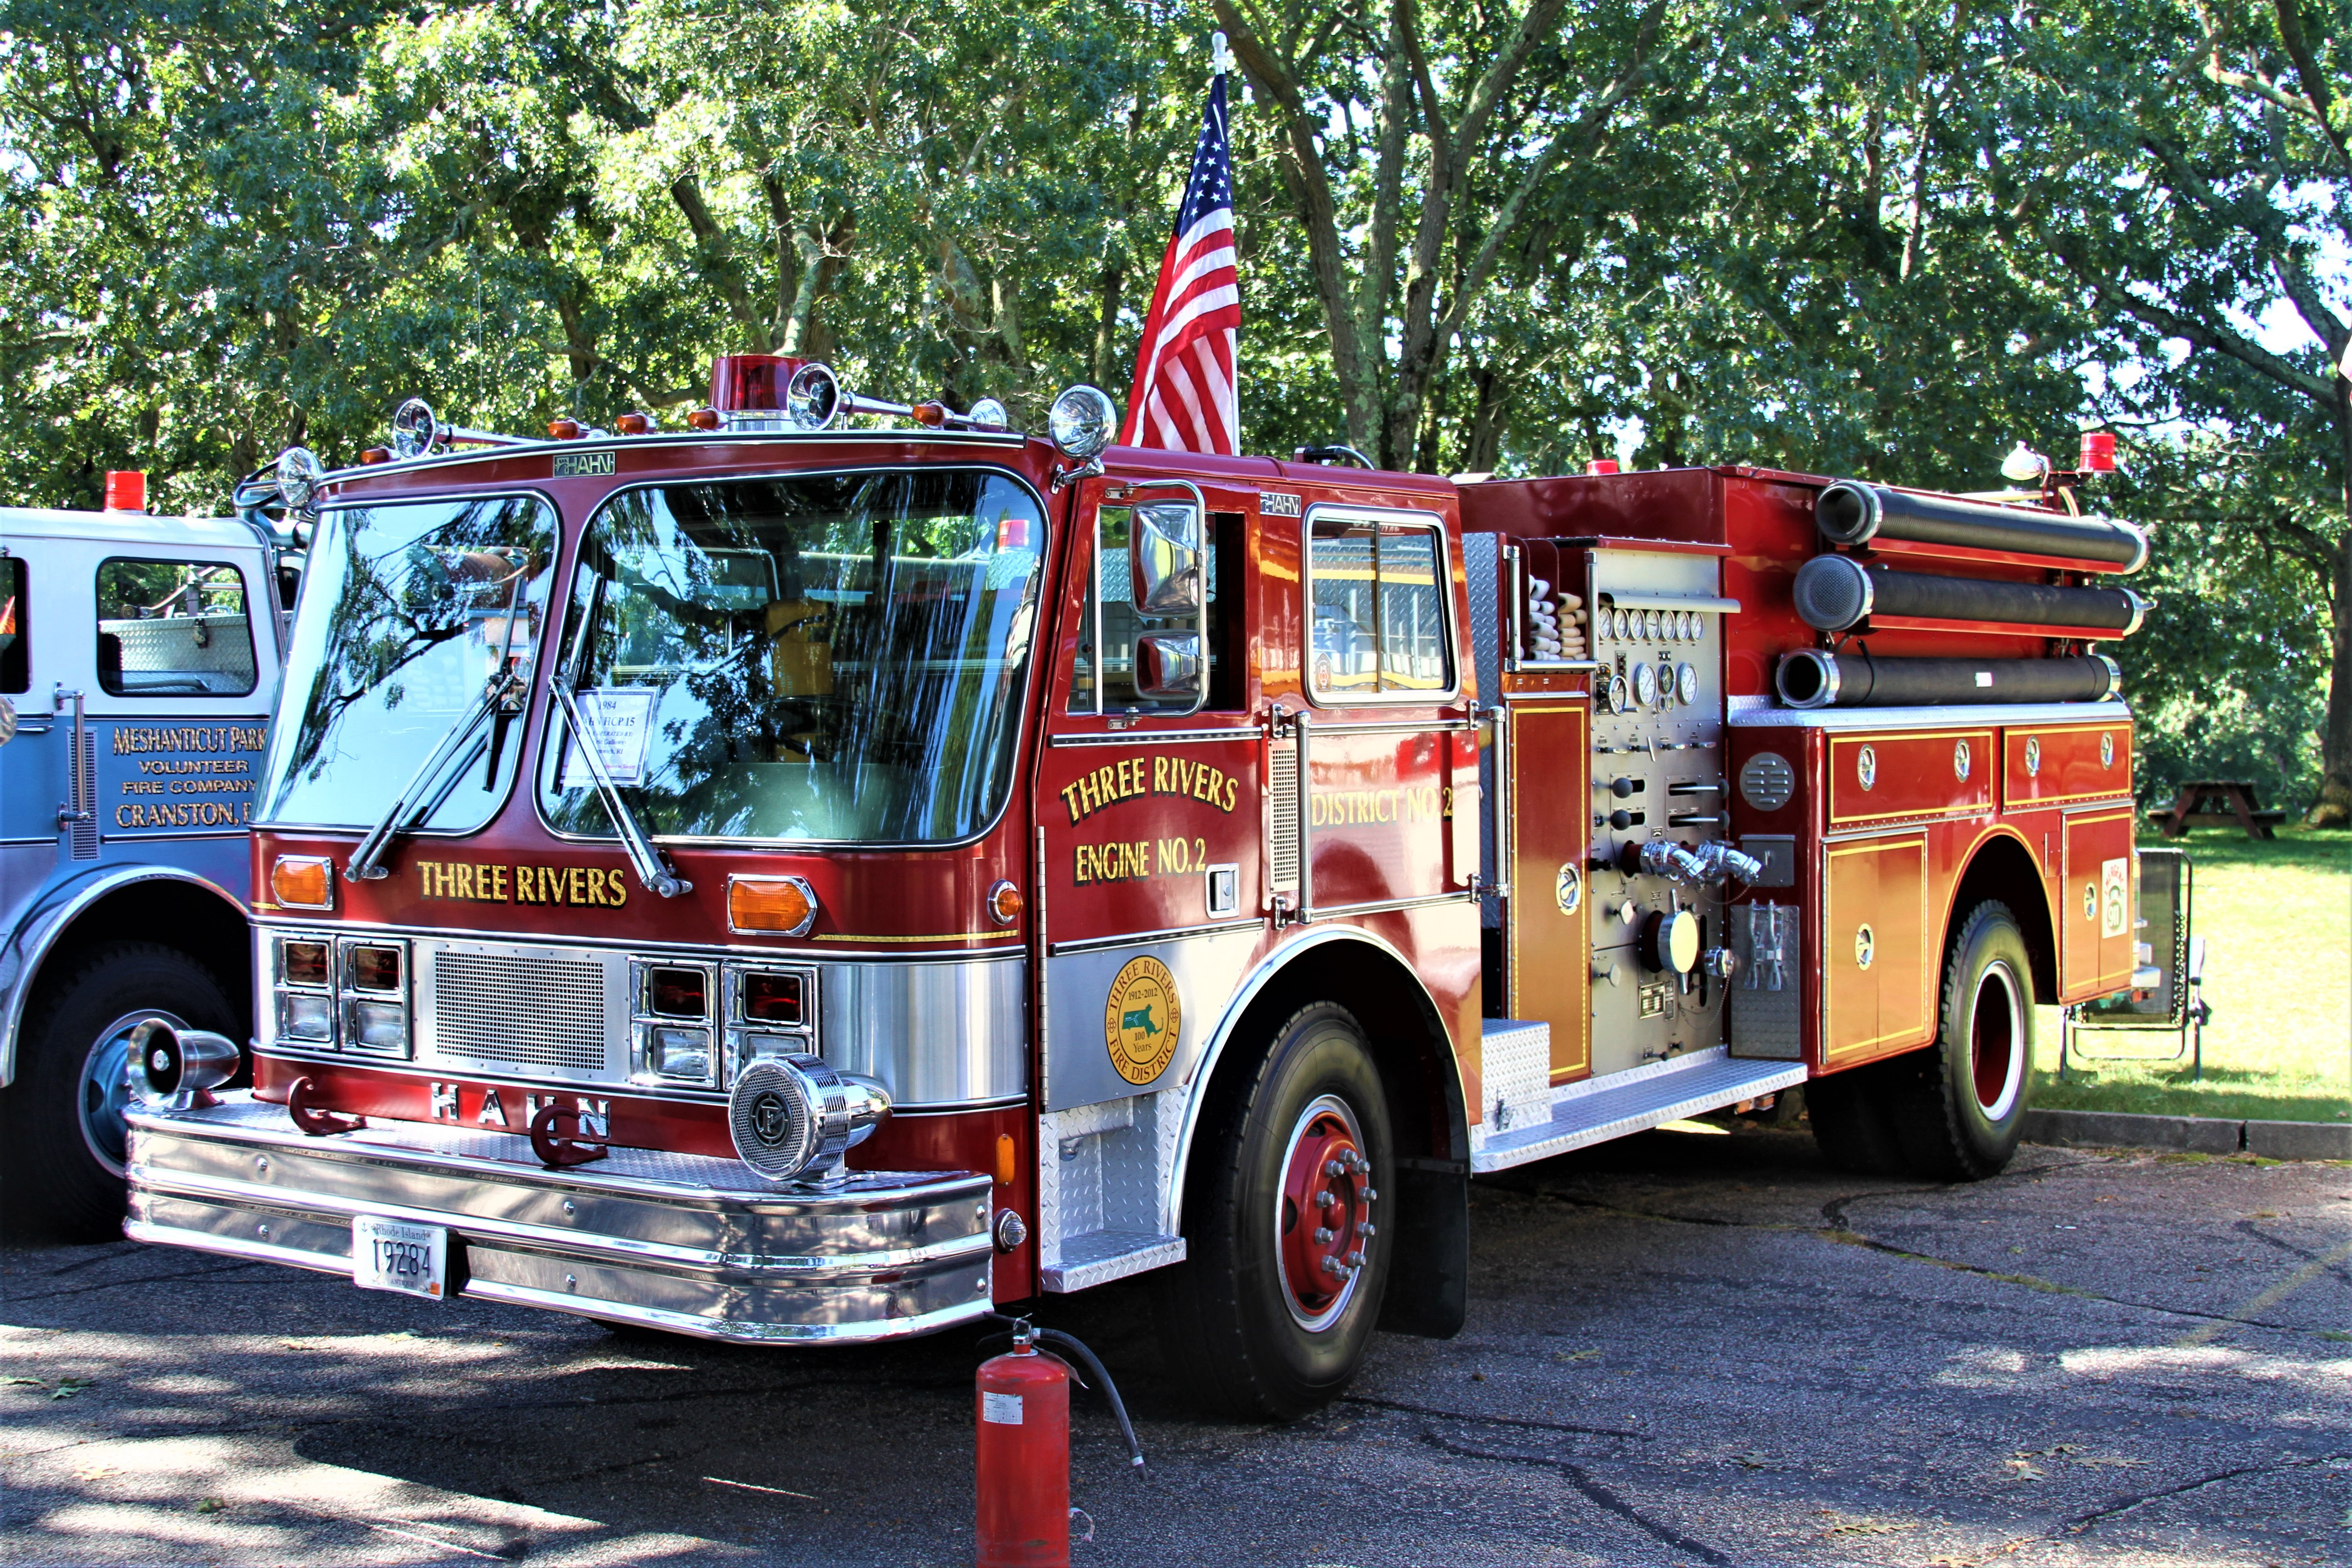 A photo  of Antique Fire Apparatus in Rhode Island
            Three Rivers, MA Fire Engine 2, a 1984 Hahn             taken by Richard Schmitter